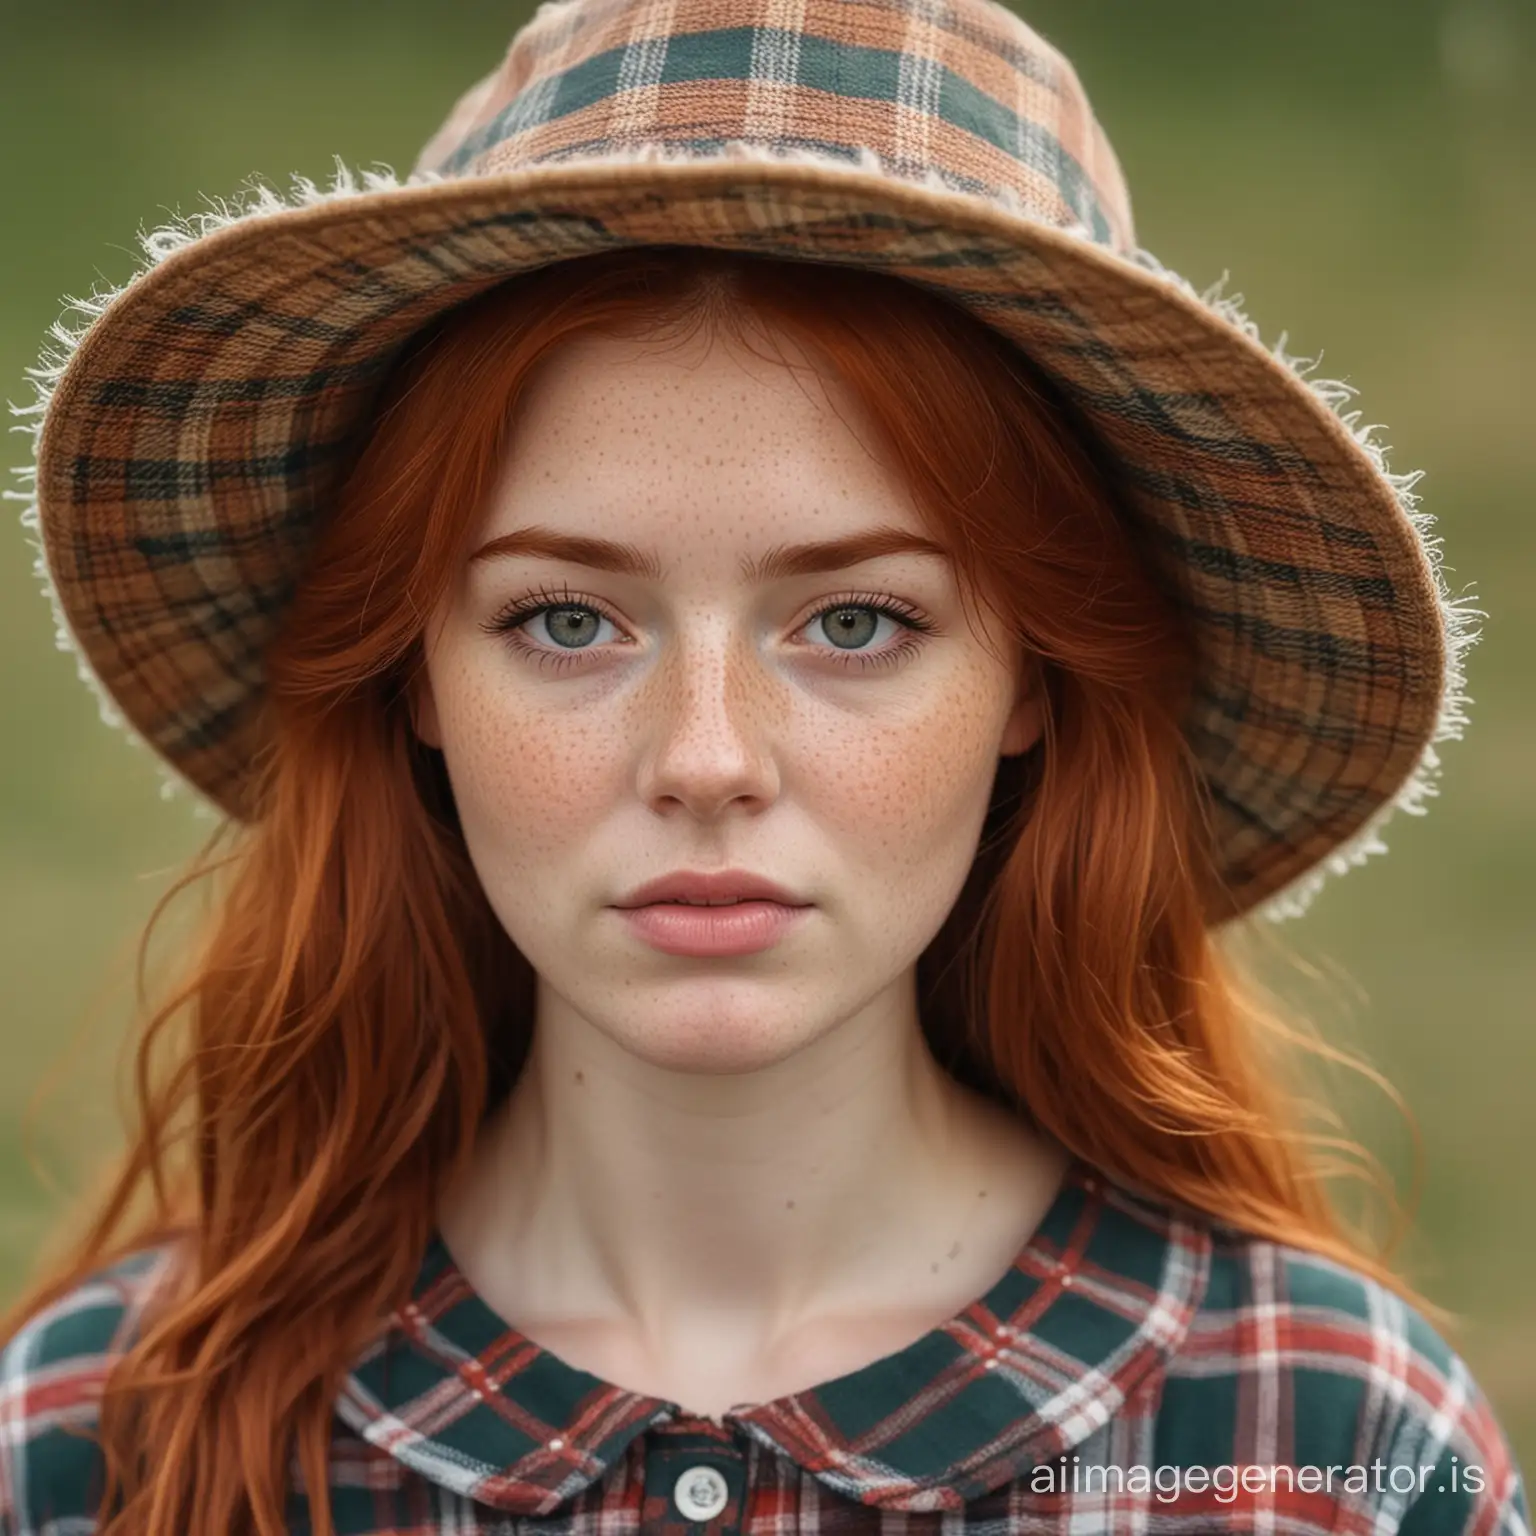 Redhead-Girl-in-Plaid-Dress-and-Hat-with-Freckles